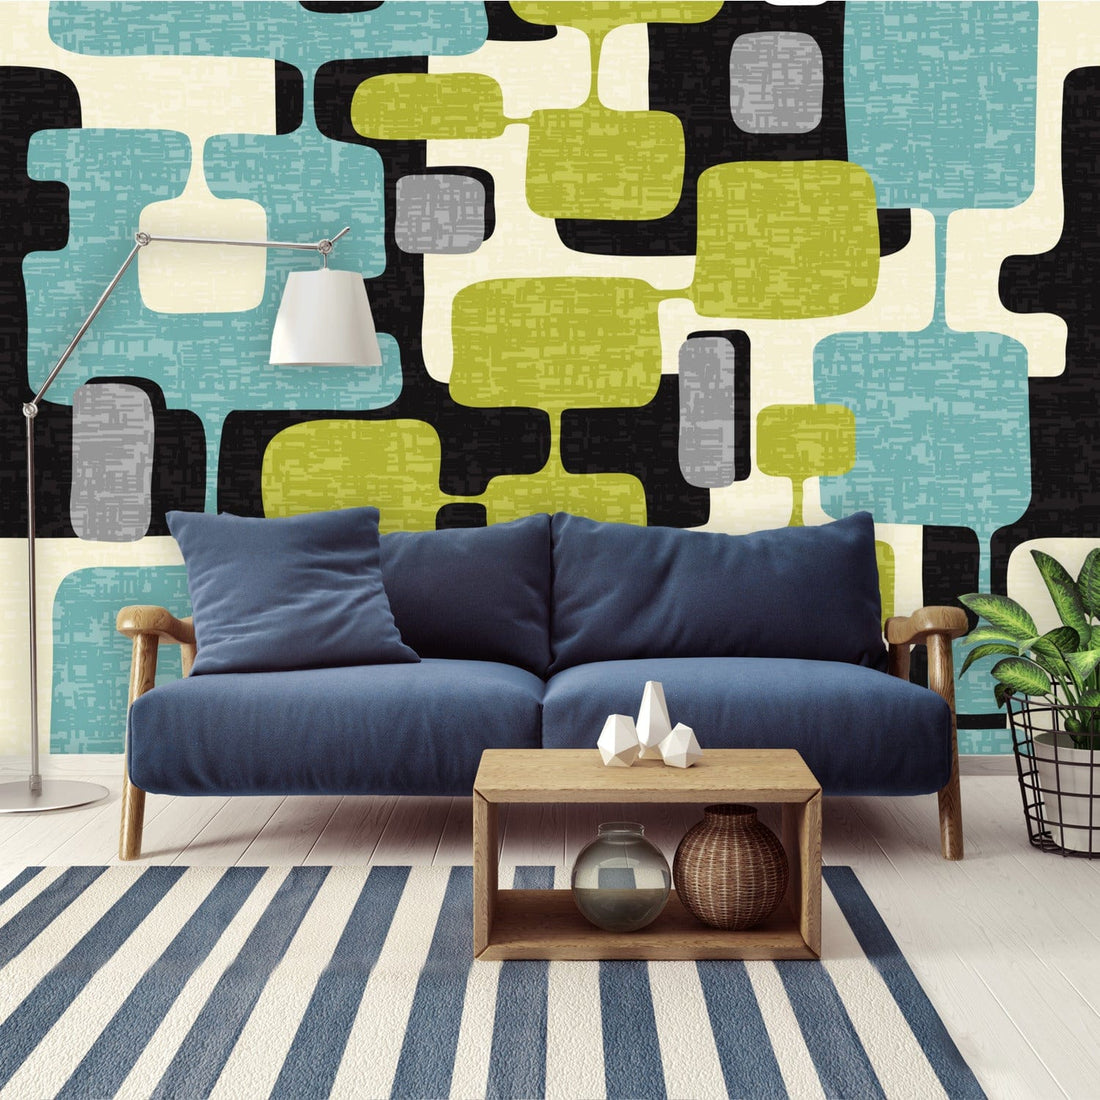 Kate McEnroe New York Wall Mural - Mid Century Modern Abstract, Retro Teal, Lime Green, Gray, Black MCM Wallpaper, Vintage Style Geometric Wall CoveringWall Mural80728